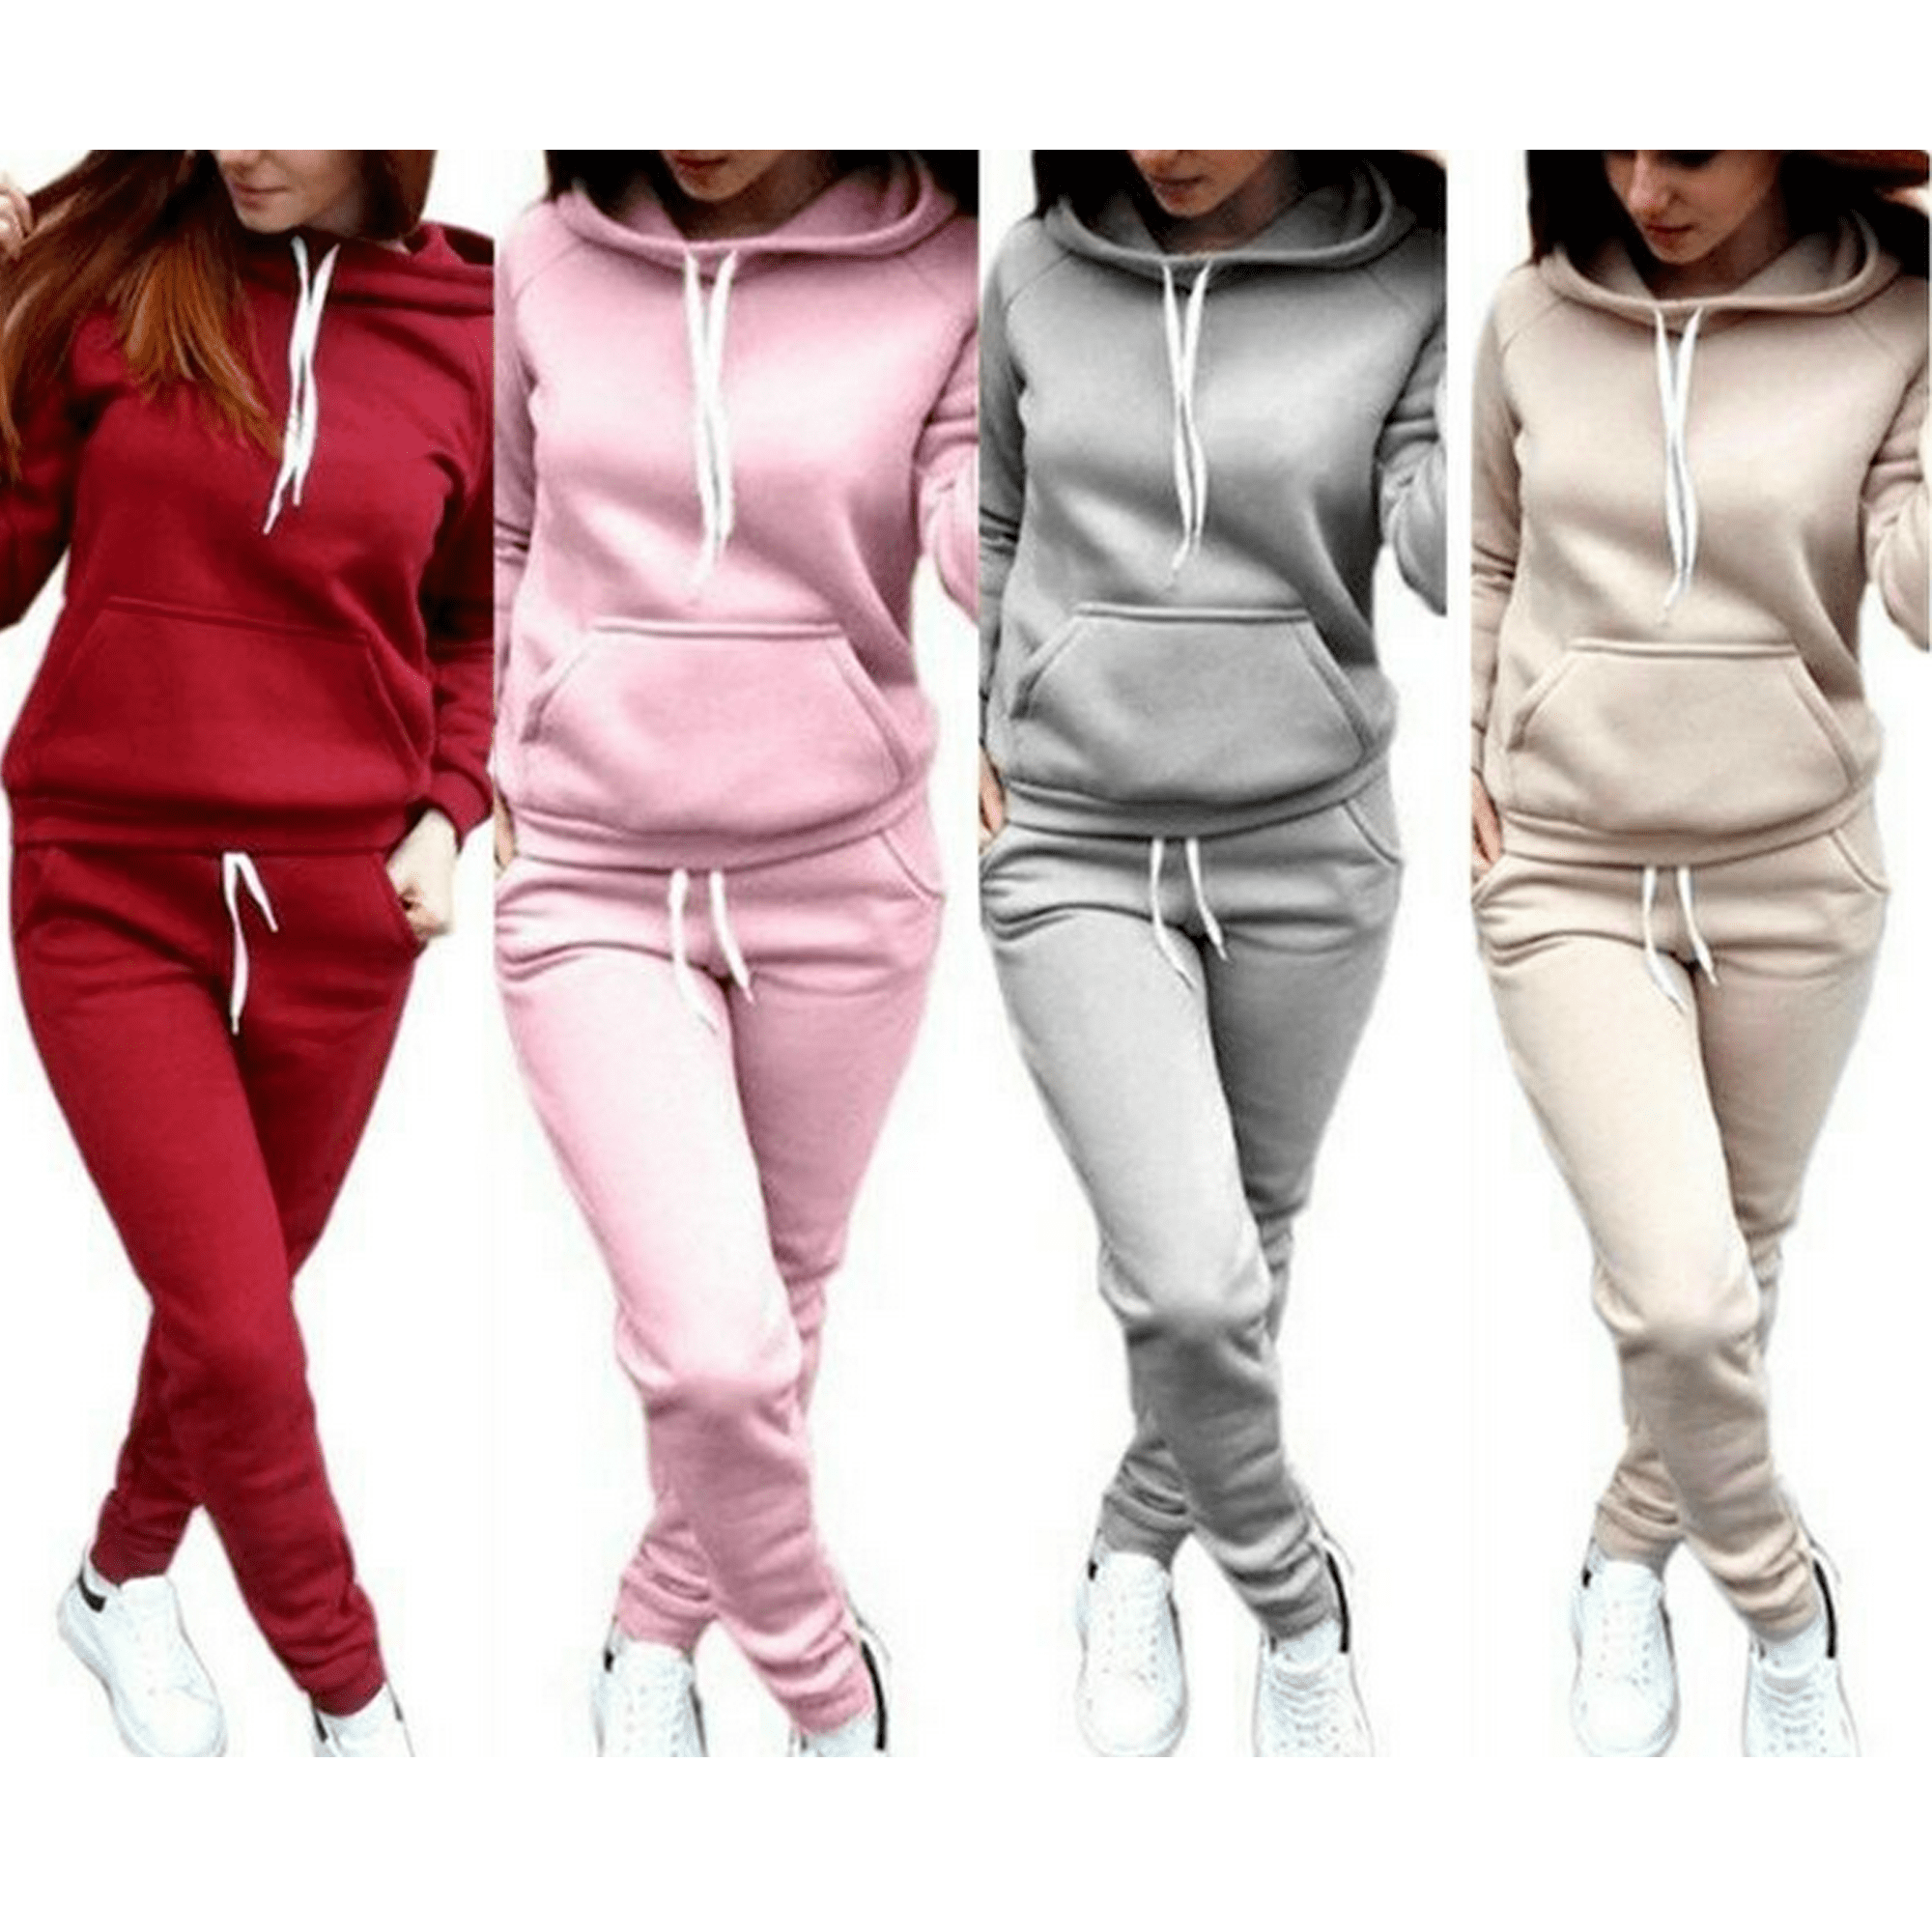 Women's 2 Piece Solid Color Hoodie Sweatsuits Casual Outfits Set Sports Suit Workout Tracksuit Activewear with Pocket